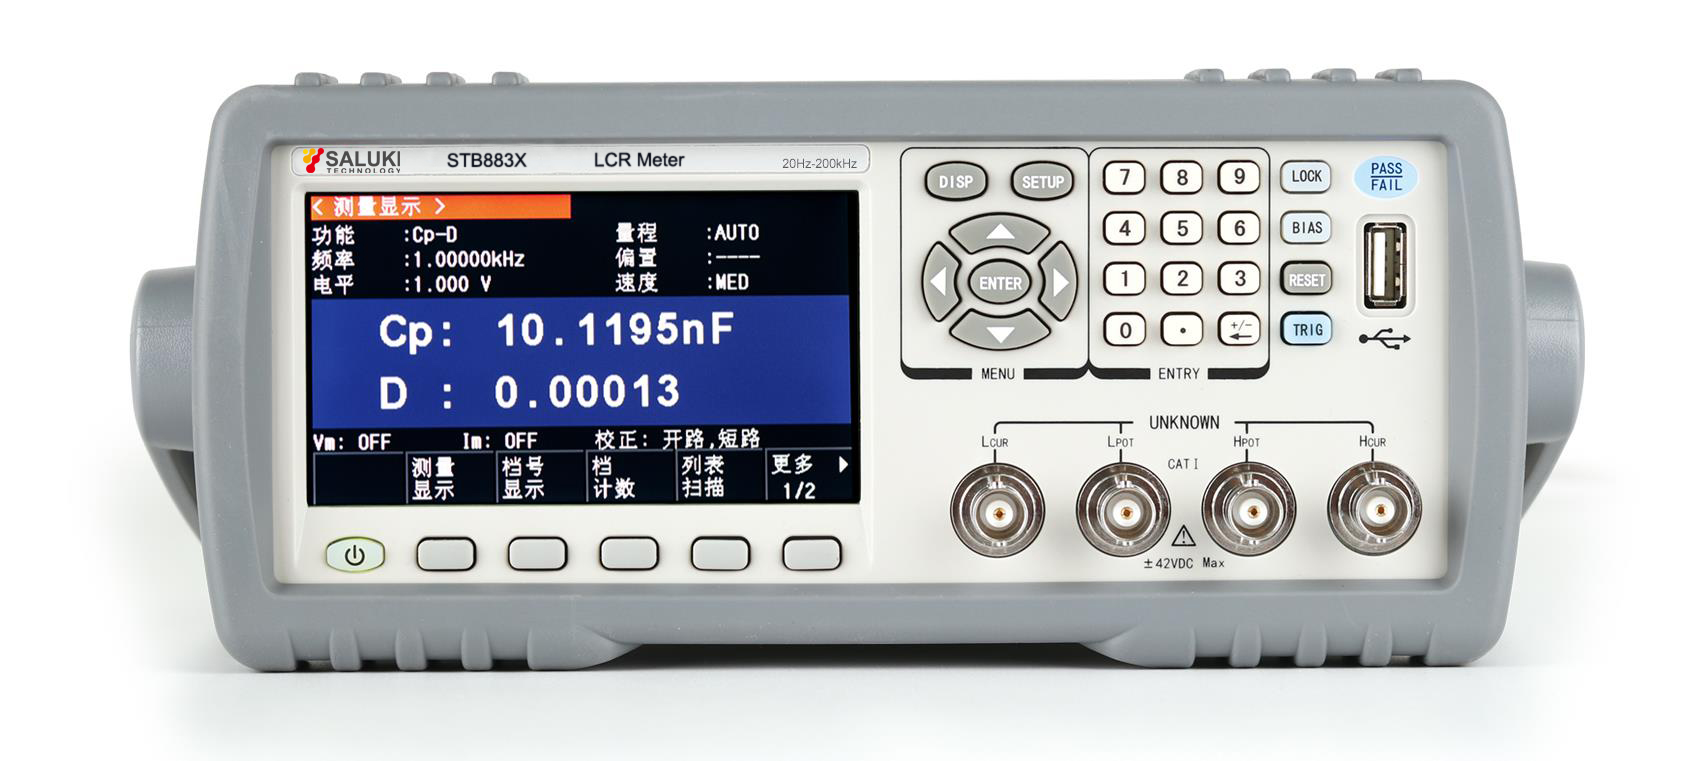 STB883X Series Compact LCR Meter